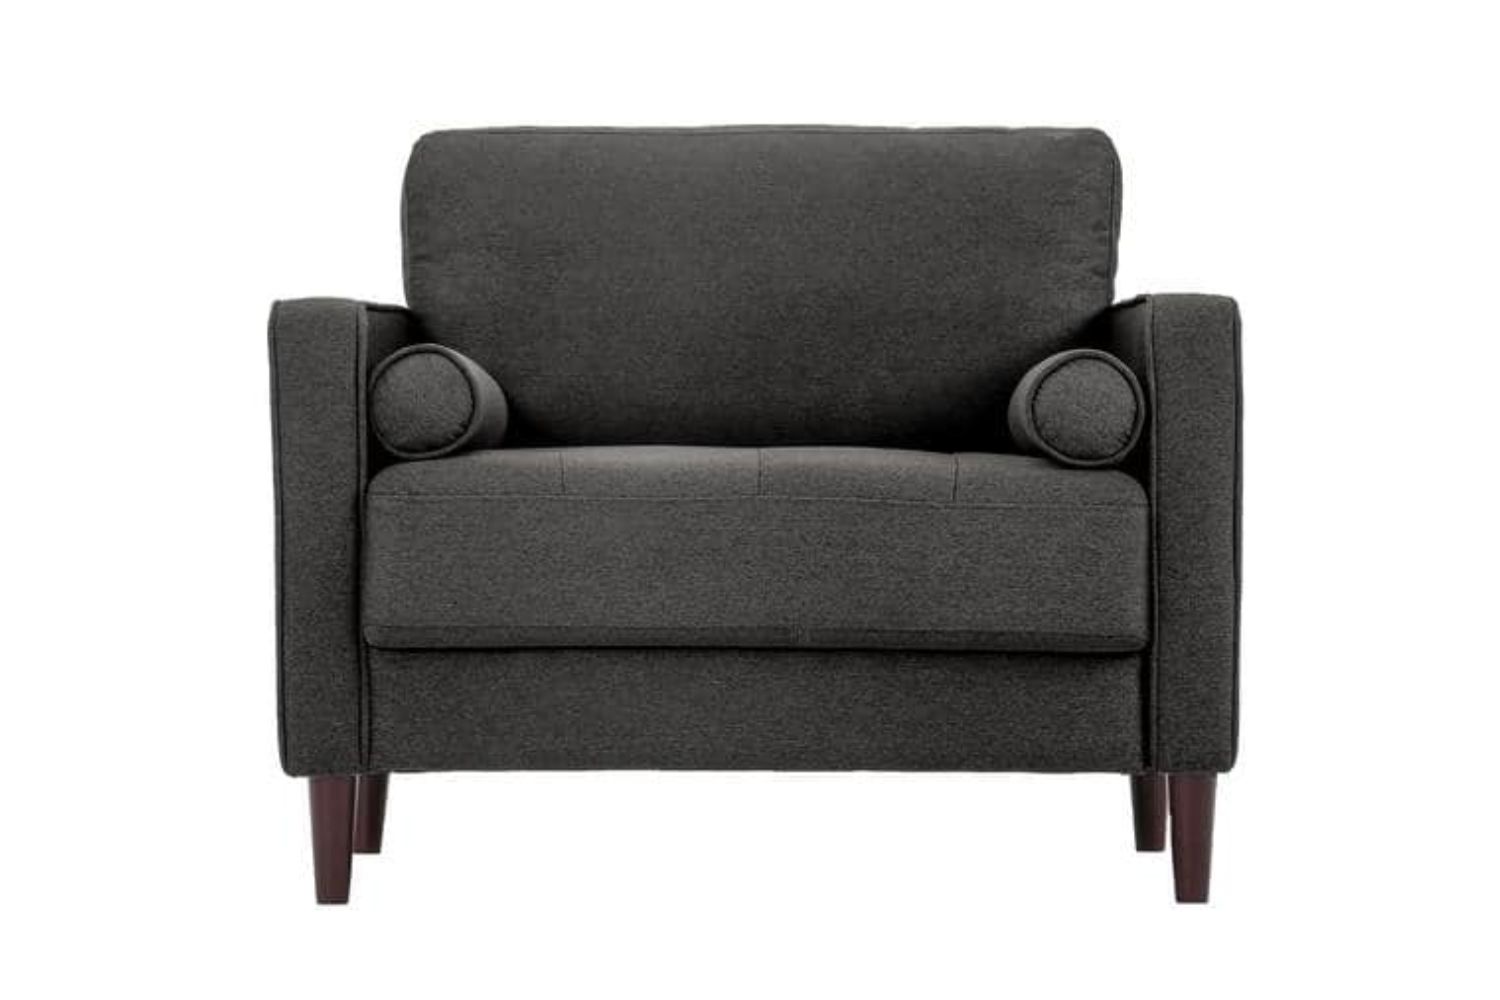 The Best Furniture You Can Find at Home Depot Right Now: Lifestyle Solutions Lillith Heather Grey Mid Century Modern Chair